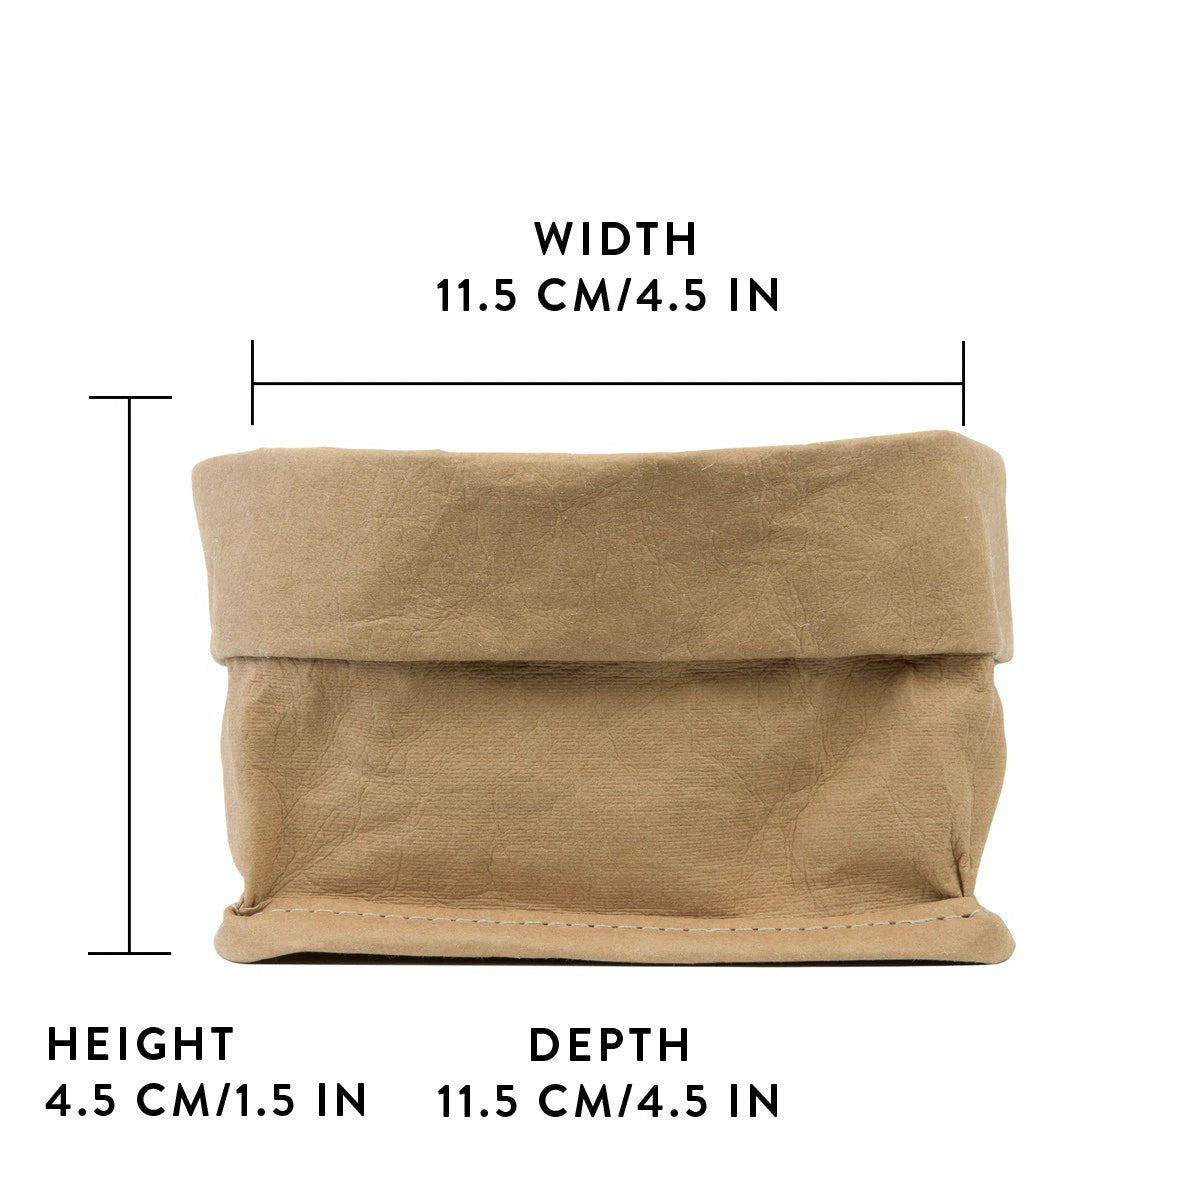 A washable paper roll-top tray is shown in tan, with graphics displaying its size - 11.5cm wide x 4.5 cm high x 11.5cm deep.